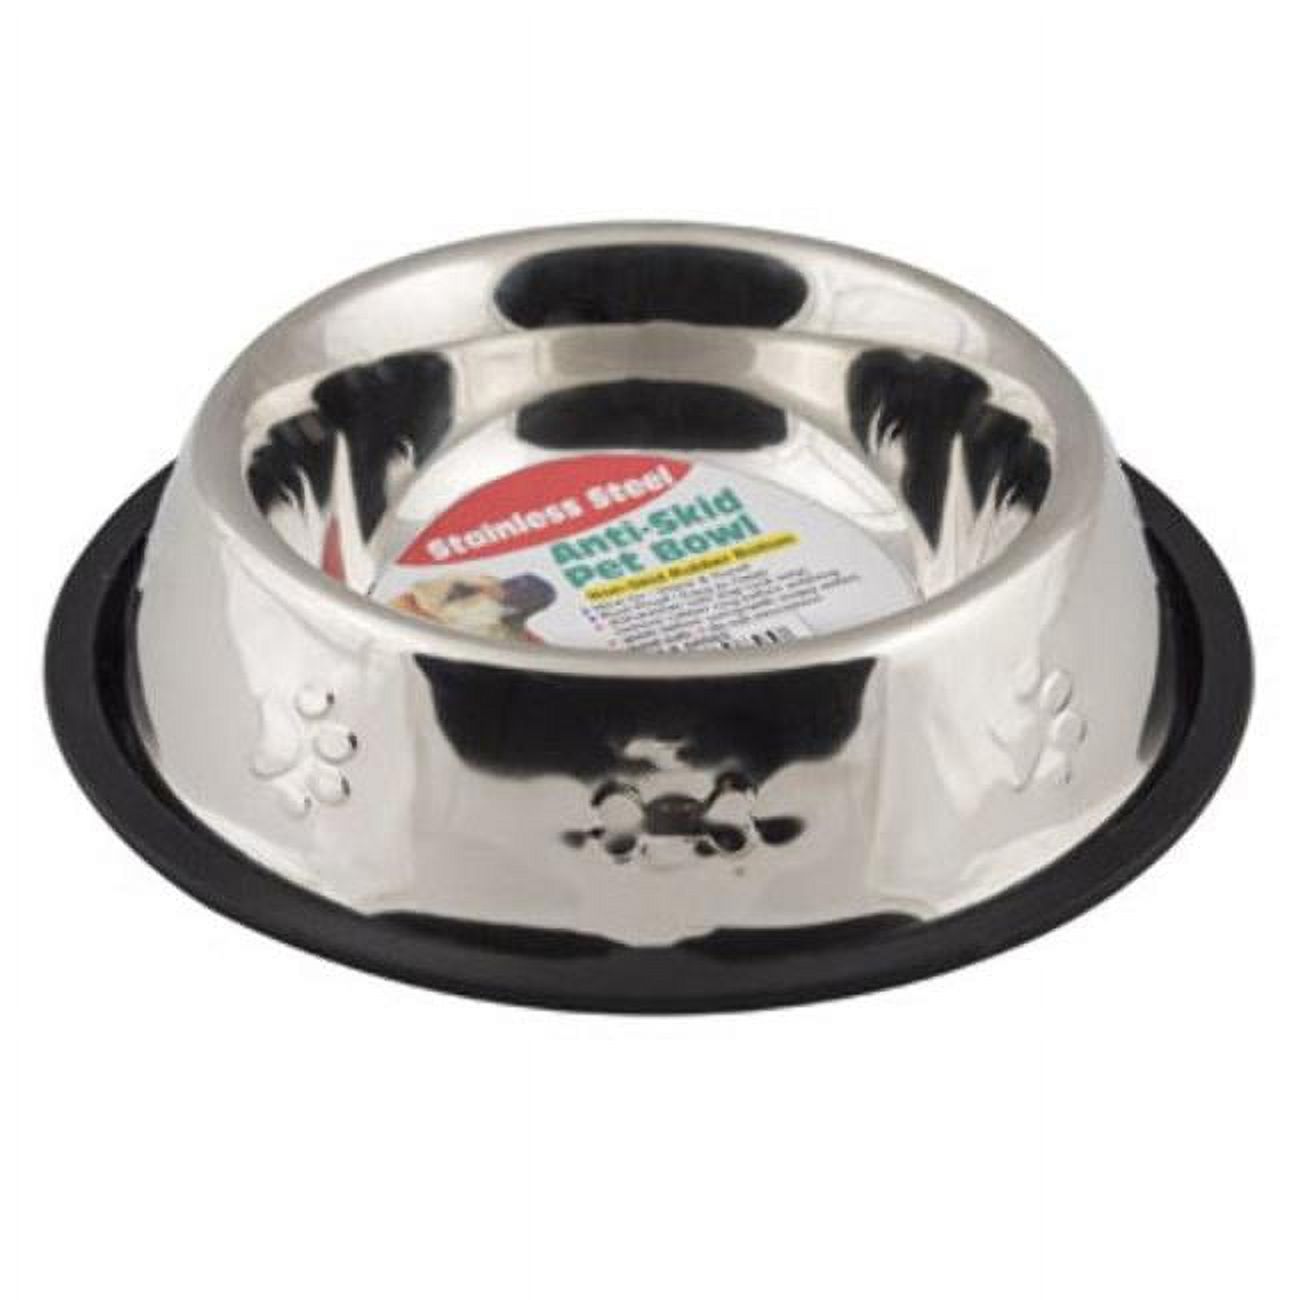 Picture of DDI 2324881 32 oz Stainless Steel Pet Bowl, Silver - Case of 24 - 24 Per Pack